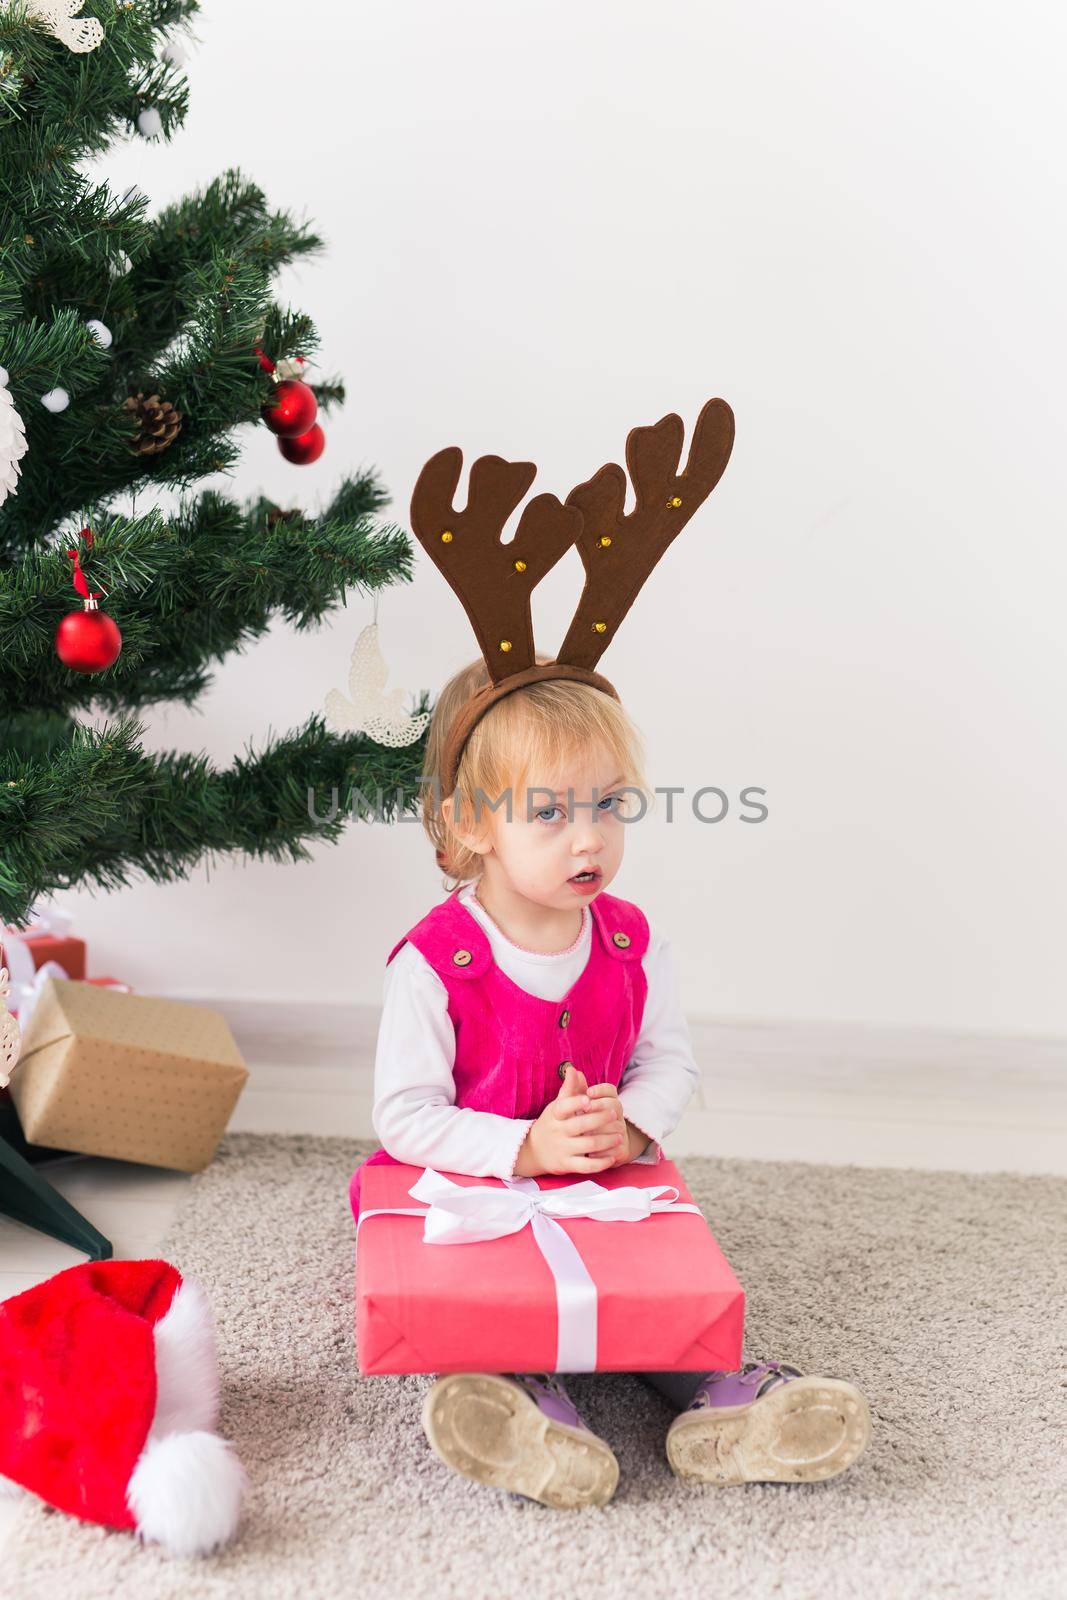 Baby holding Christmas gift. Winter holidays concept